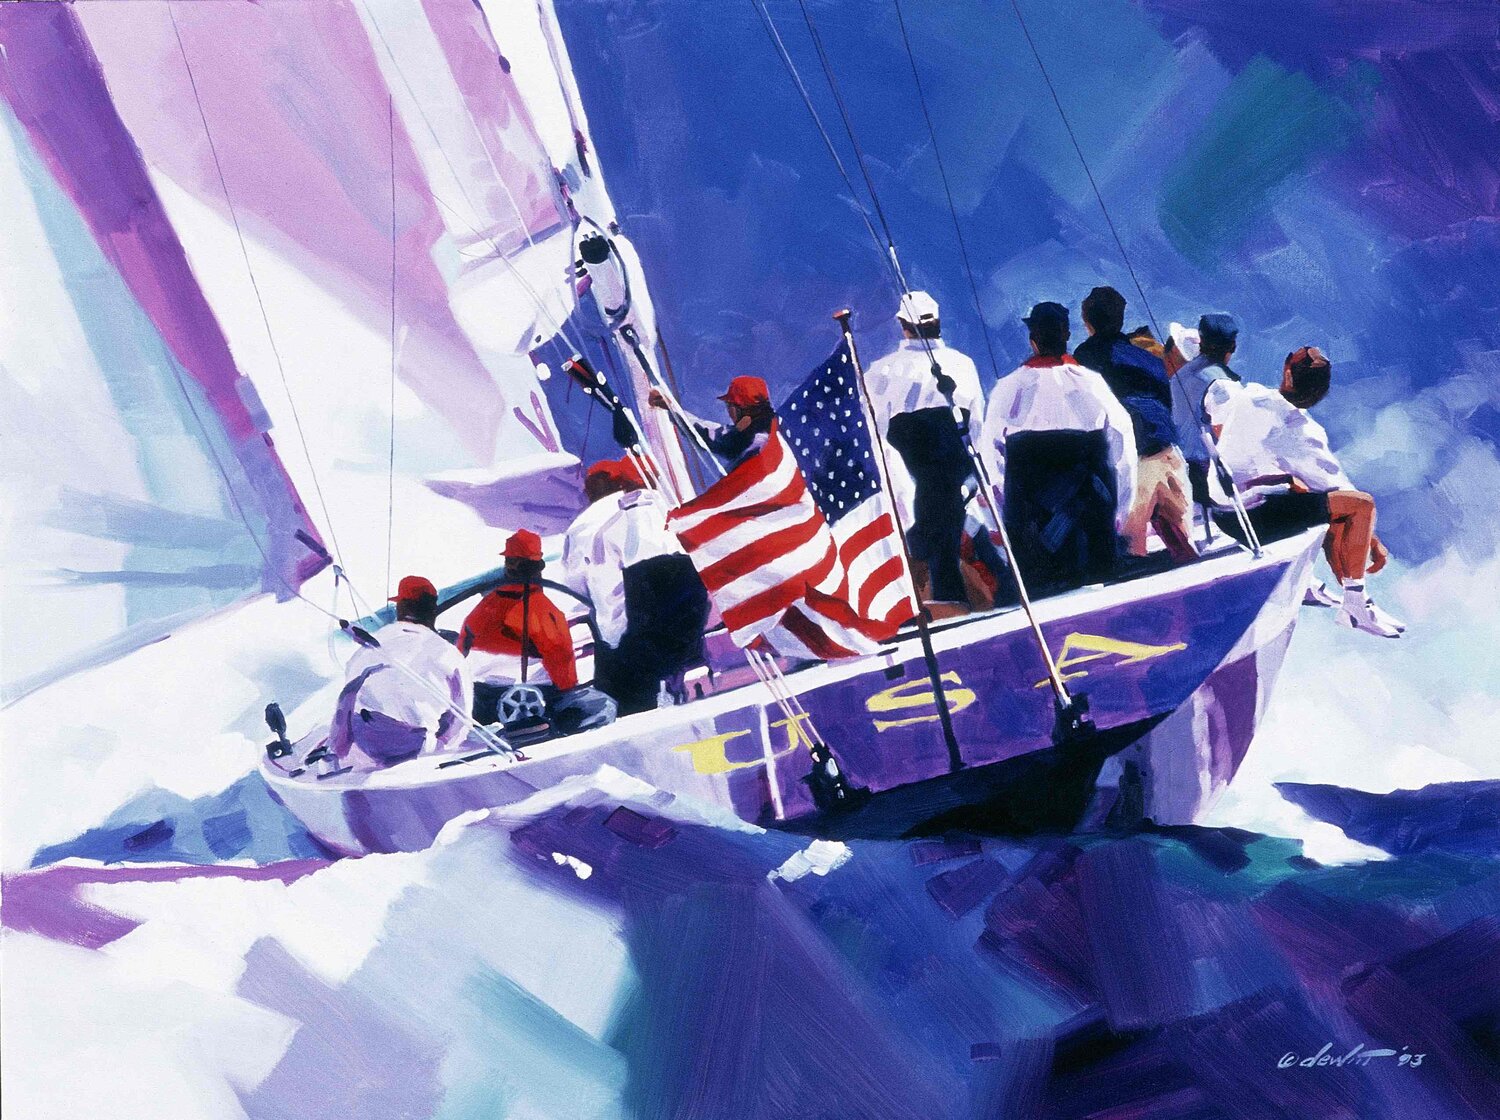 AMERICAS CUP POSTER 'Stars & Stripes' Bank of America - Dennis Conner  19x26” VG